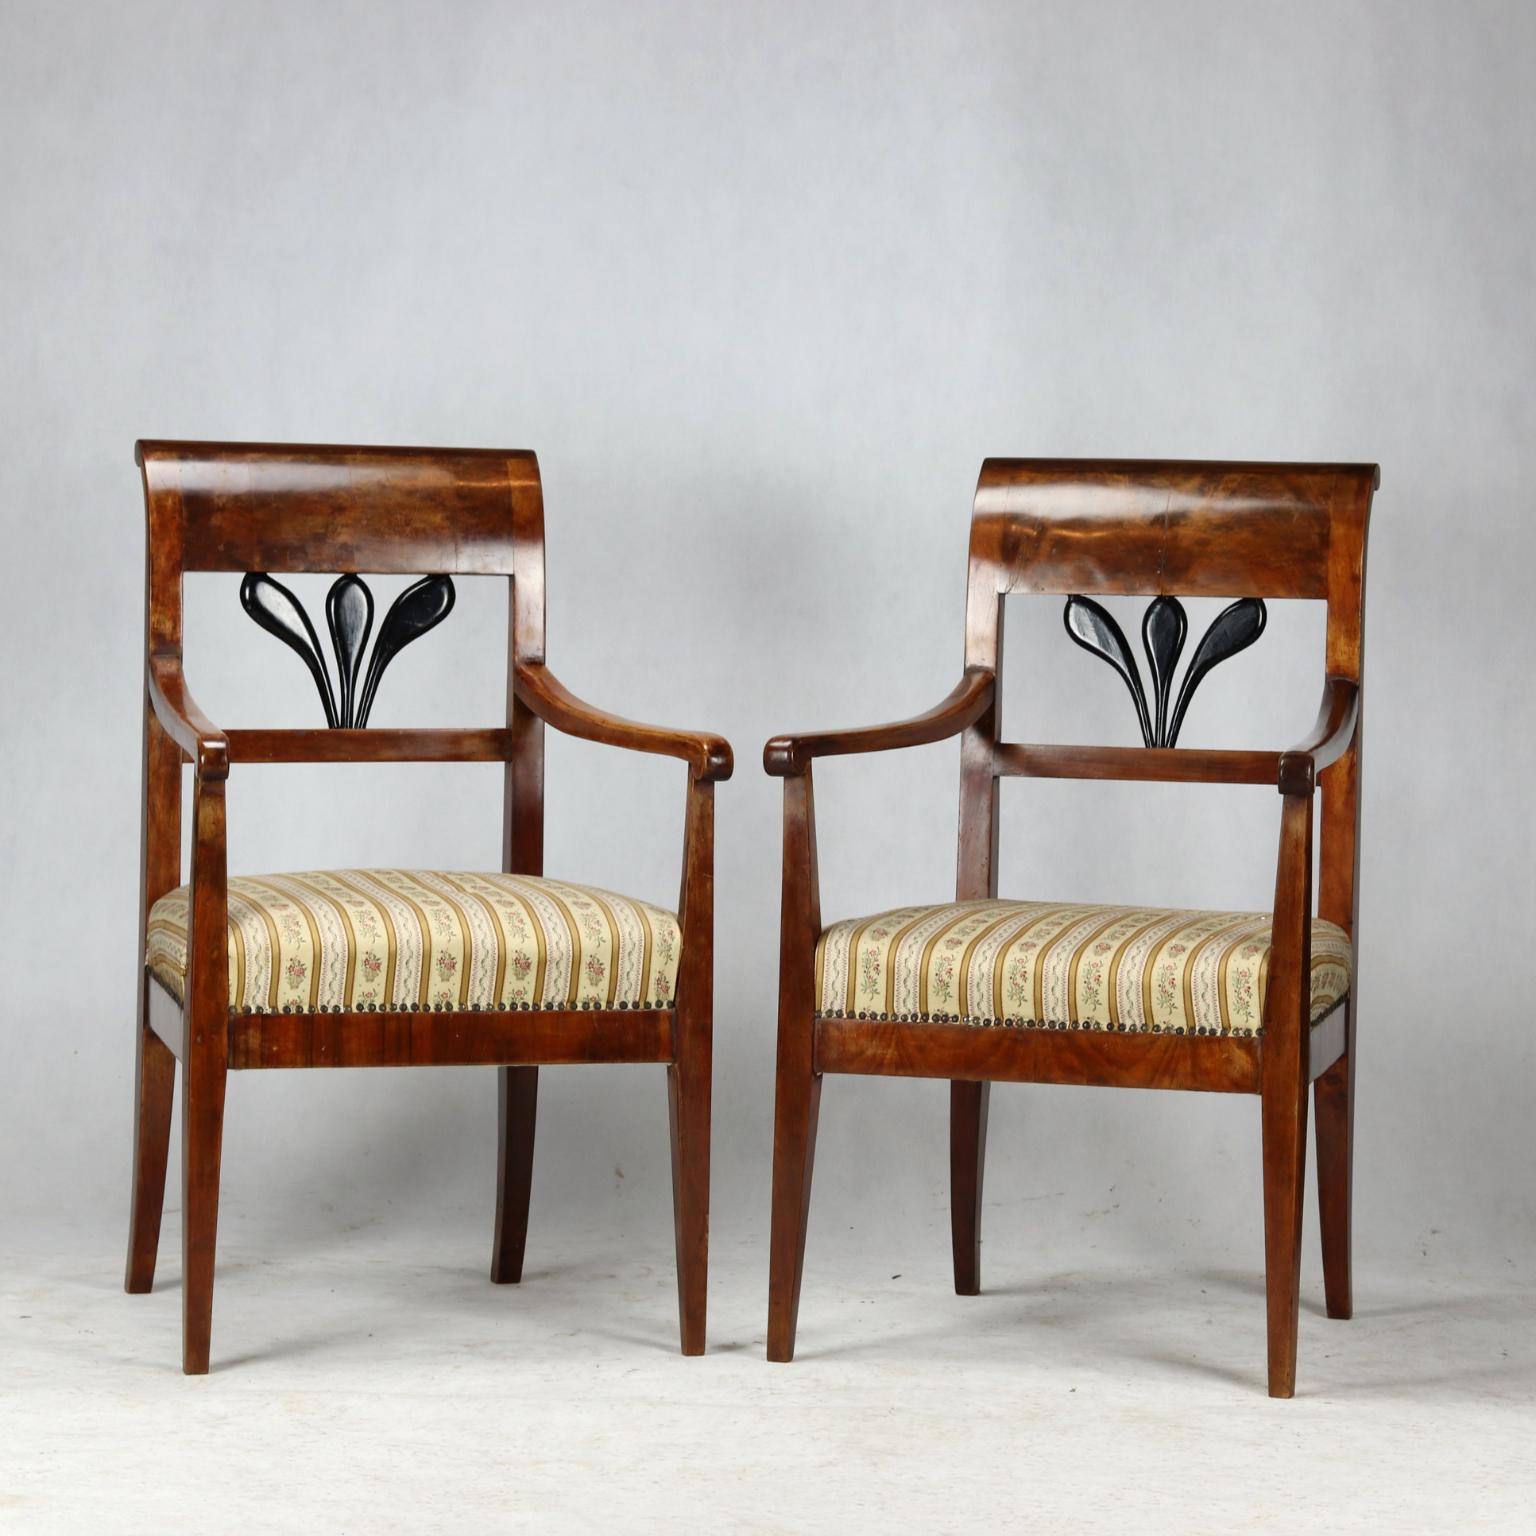 The armchairs dates from the early Biedermeier period at the beginning of the 19th century. The body of the armchairs is made of spruce wood and was covered with a very beautiful thick walnut veneer. The armchairs are in a good condition. The